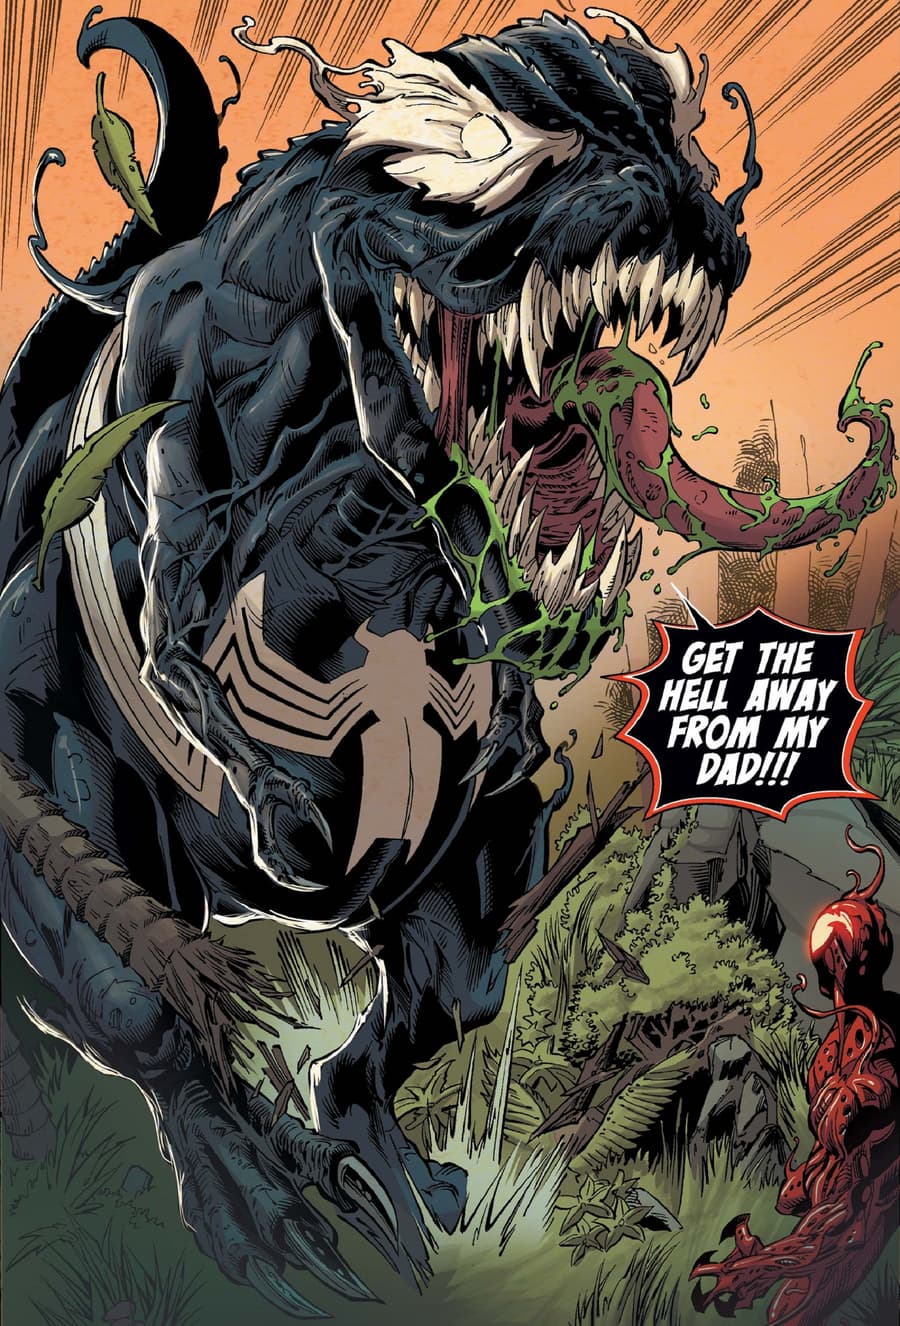 A T-Rex symbiote goes after Dylan Brock in VENOM (2018) #24.